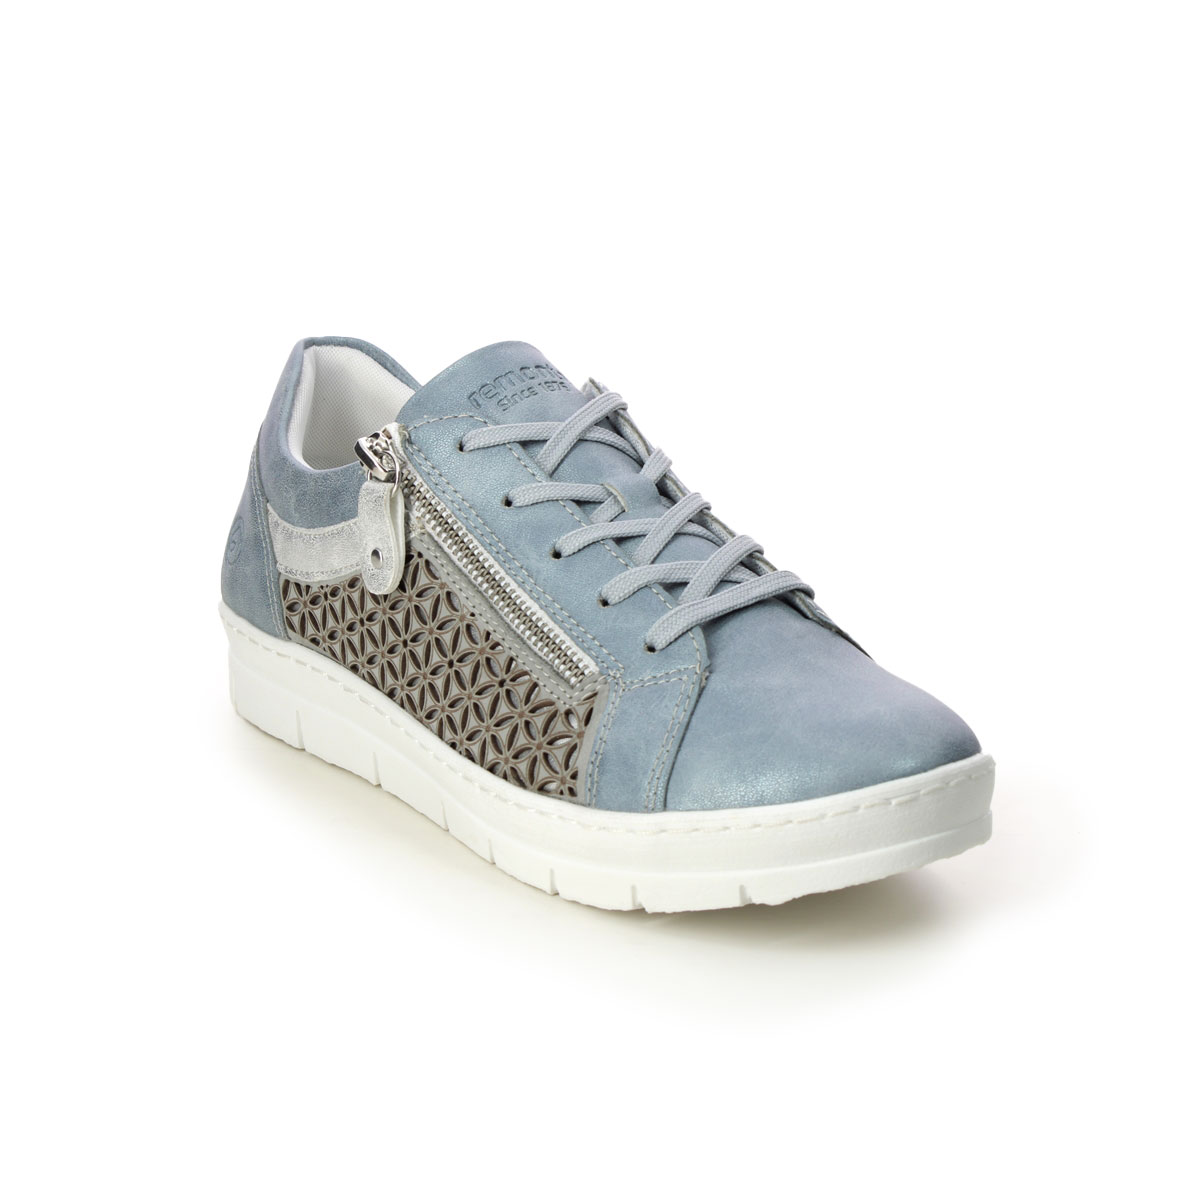 Remonte D5830-12 Ravenna 11 Denim leather Womens trainers in a Plain Leather and Man-made in Size 38